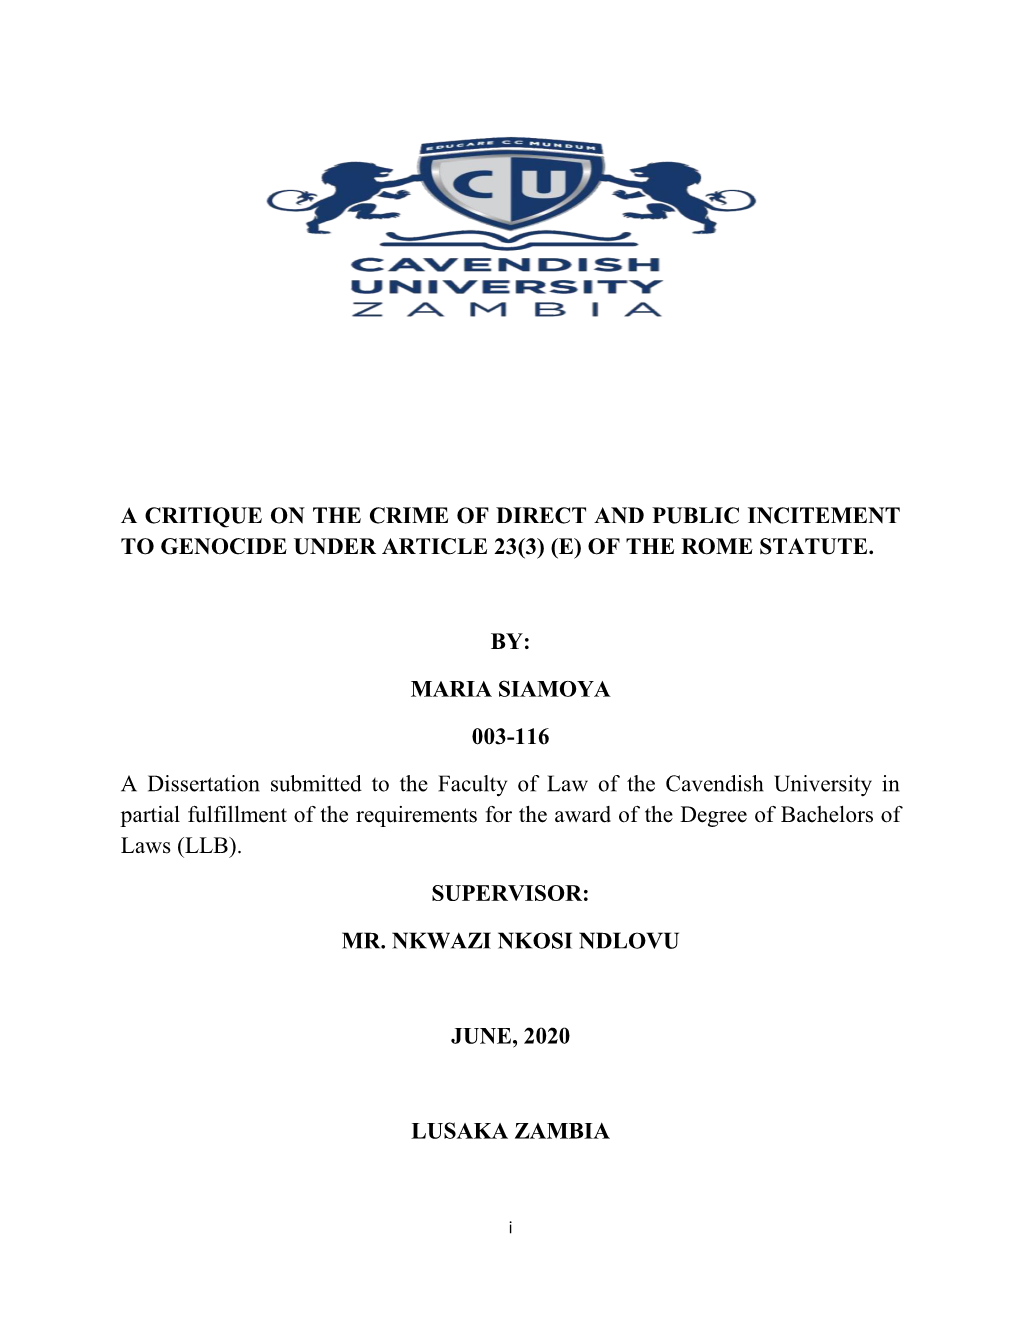 A Critique on the Crime of Direct and Public Incitement to Genocide Under Article 23(3) (E) of the Rome Statute